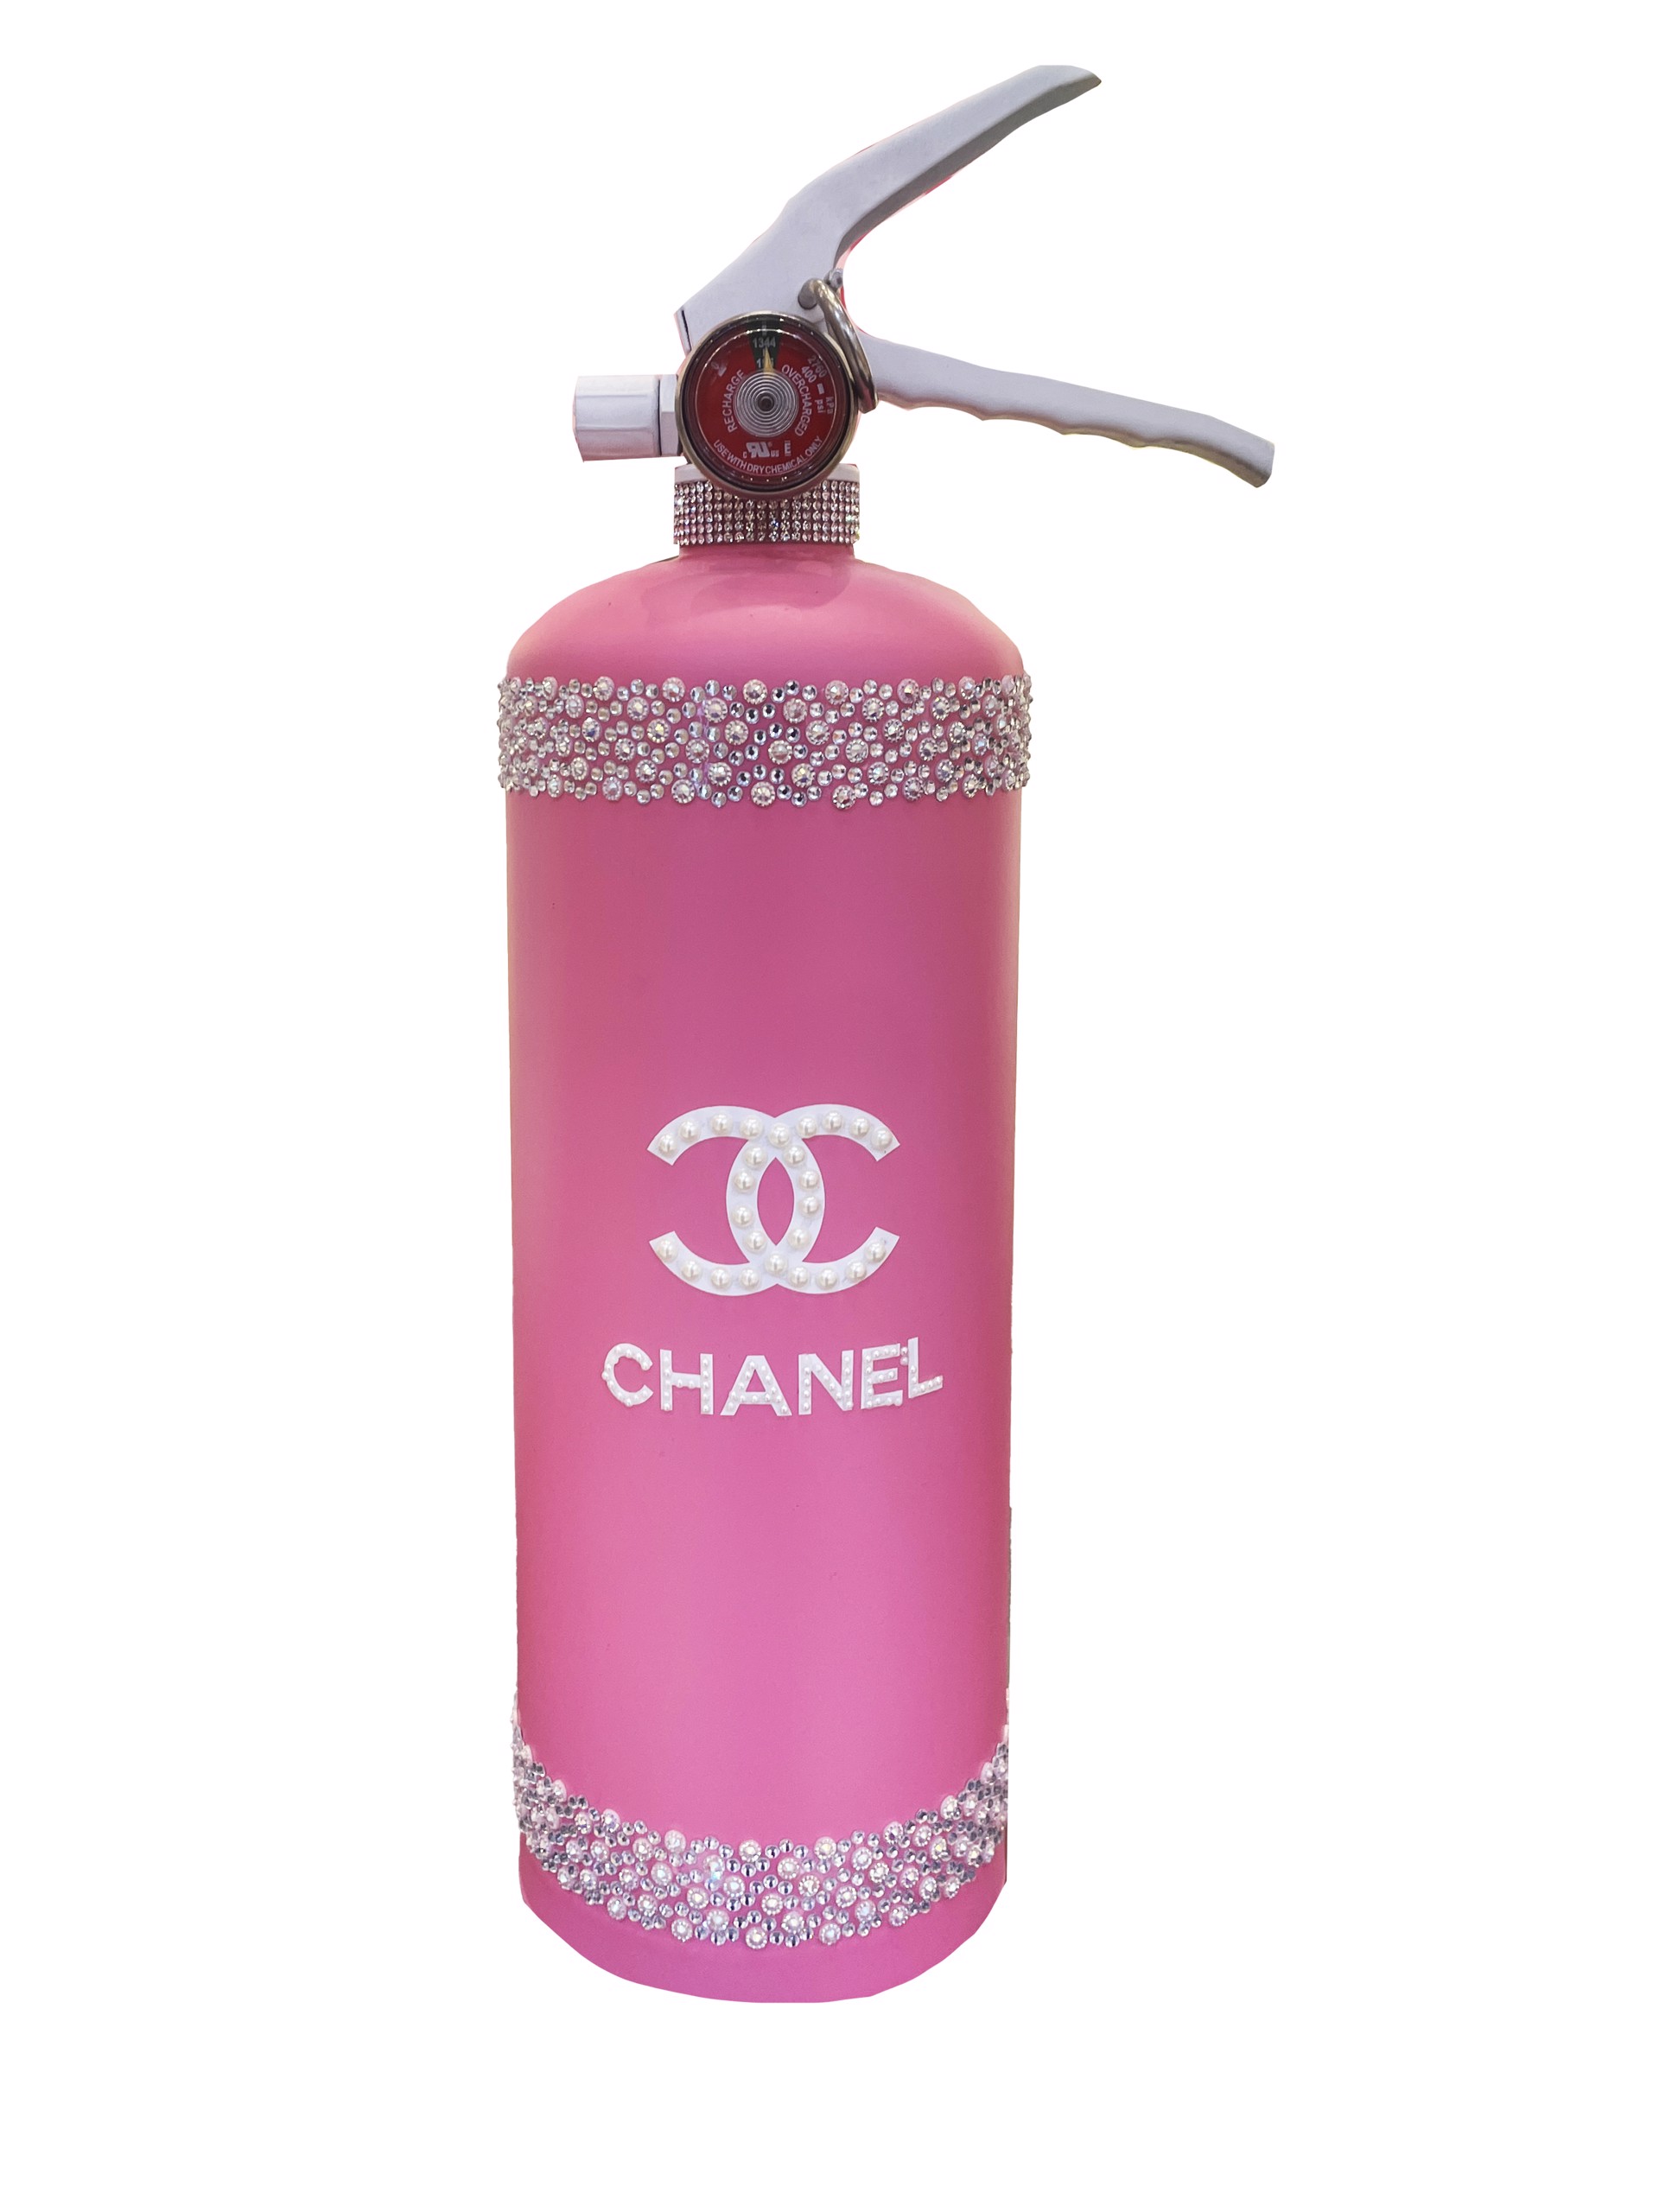 Chanel Fire Extinguisher by David Mir